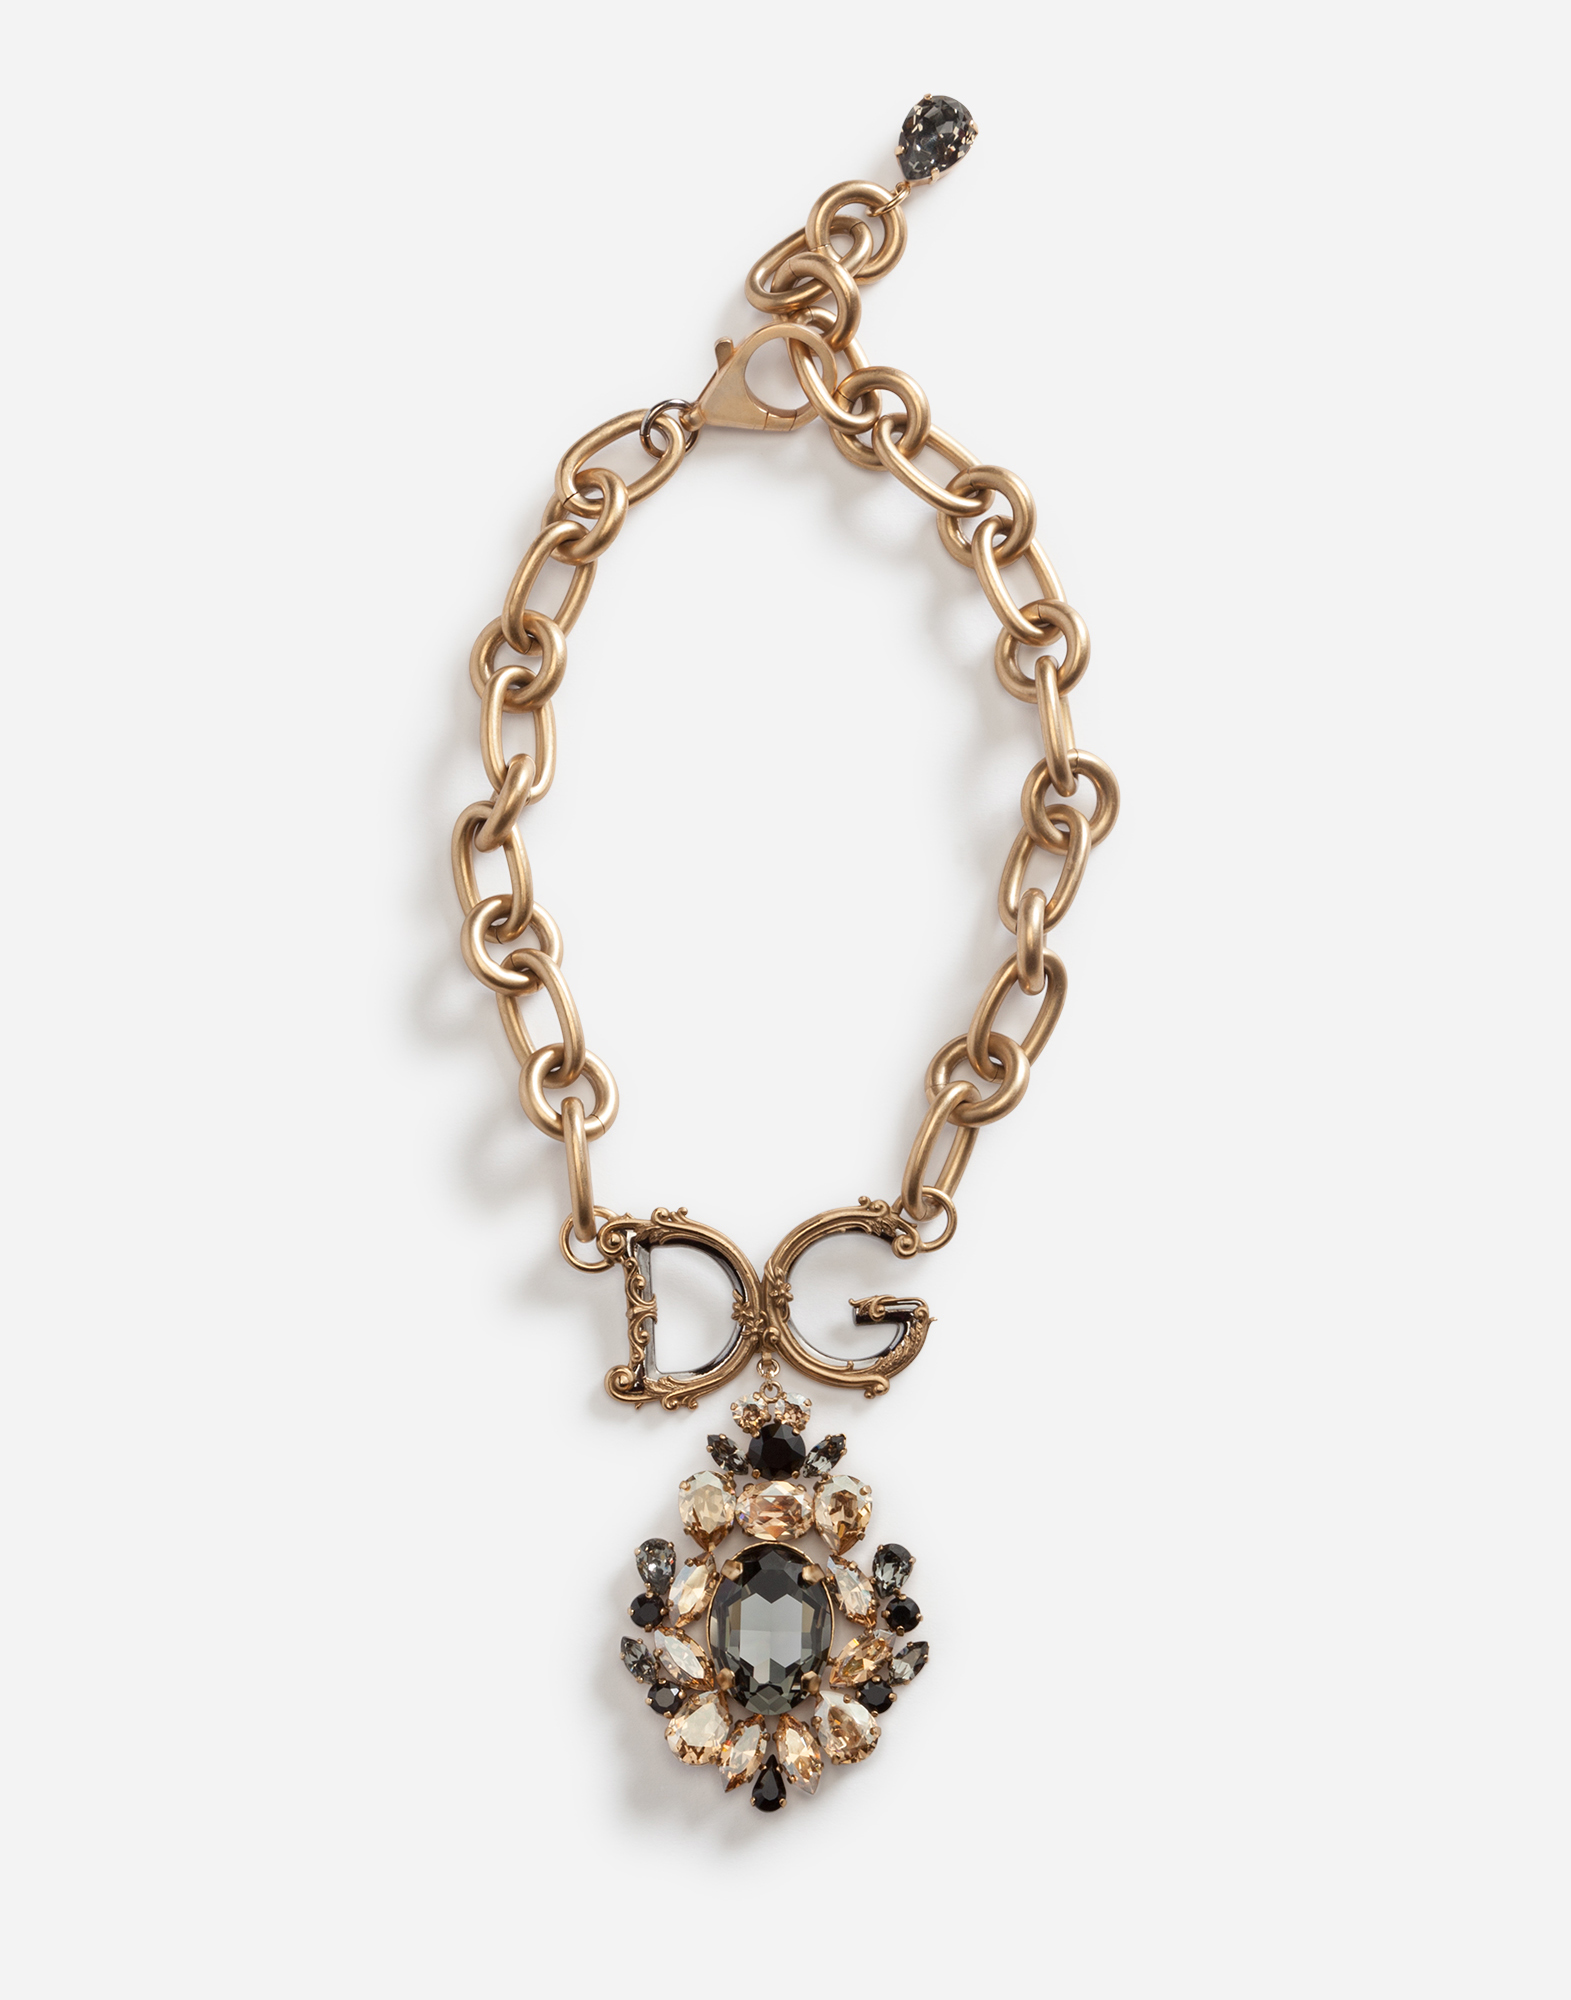 Necklace with decorative elements in Gold